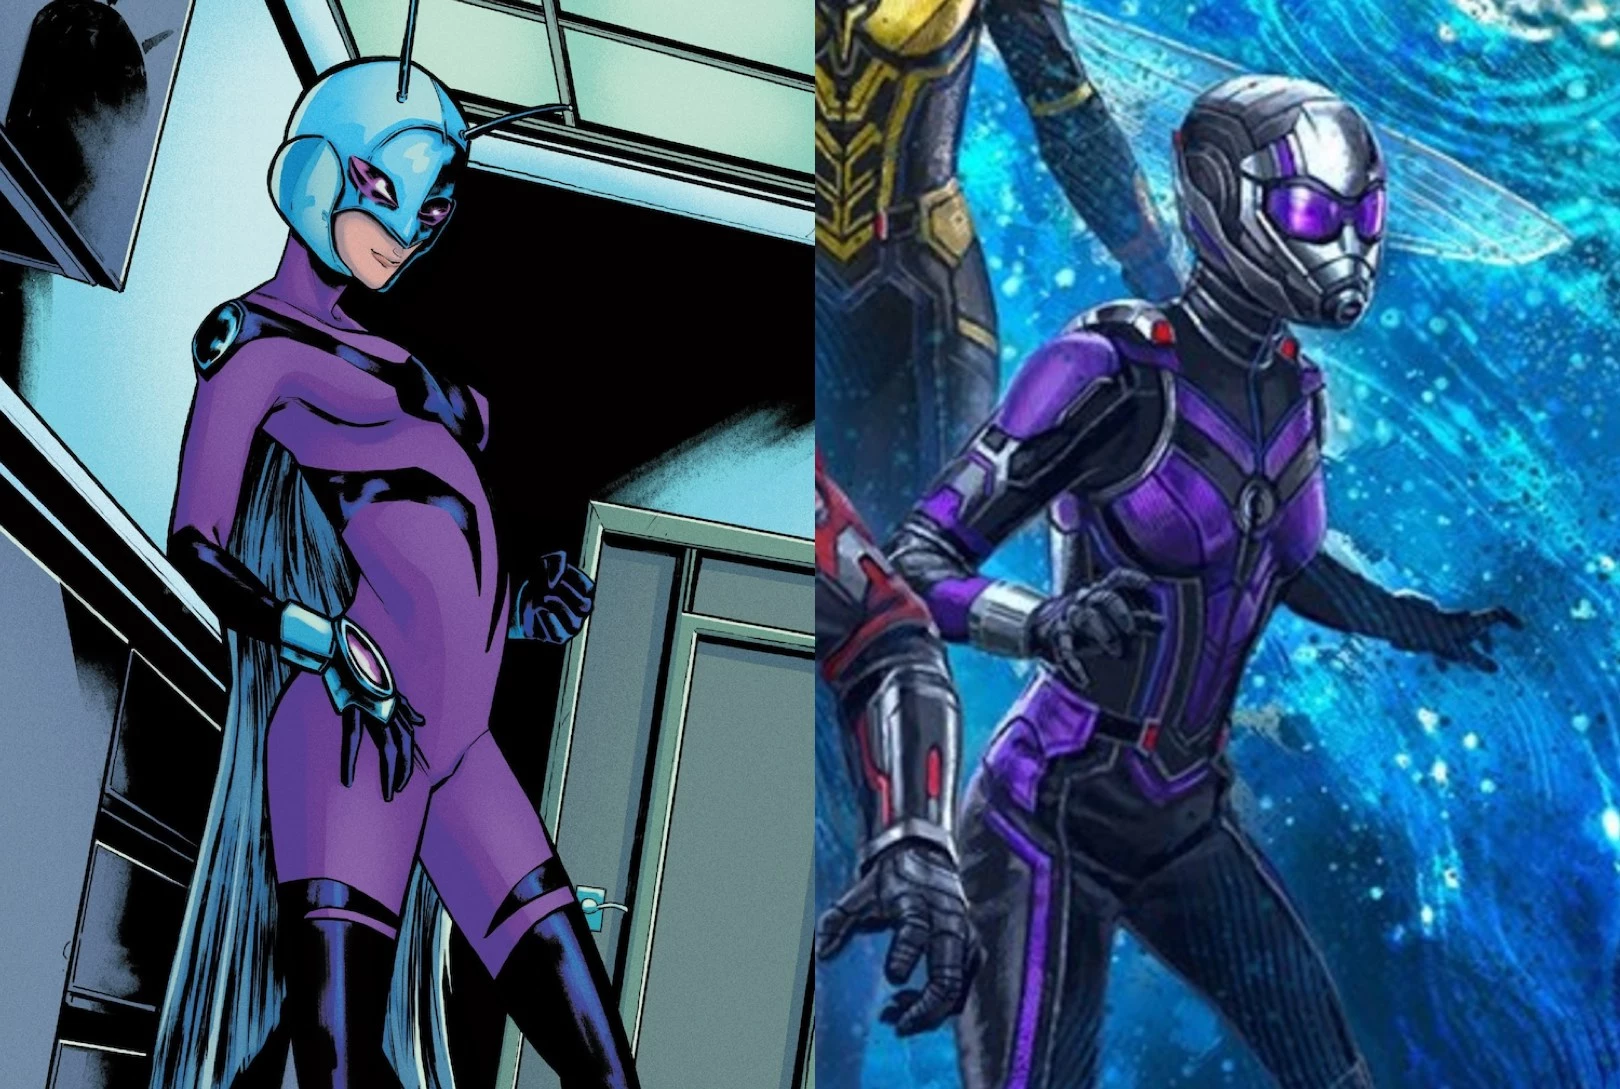 Ant-Man and the Wasp: Quantumania' MCU Easter Eggs